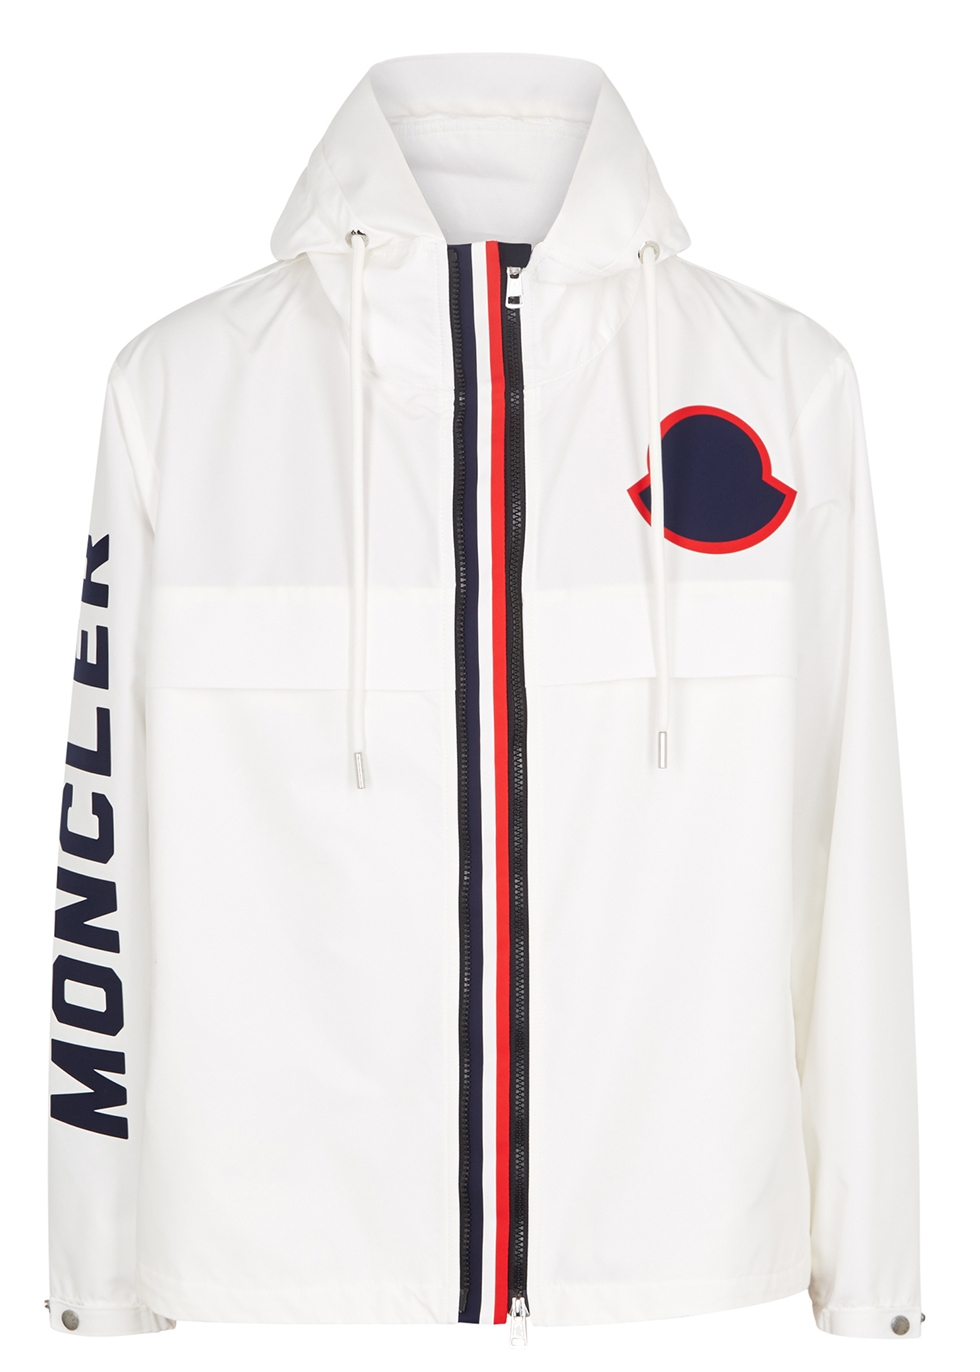 Moncler Montreal white shell jacket 